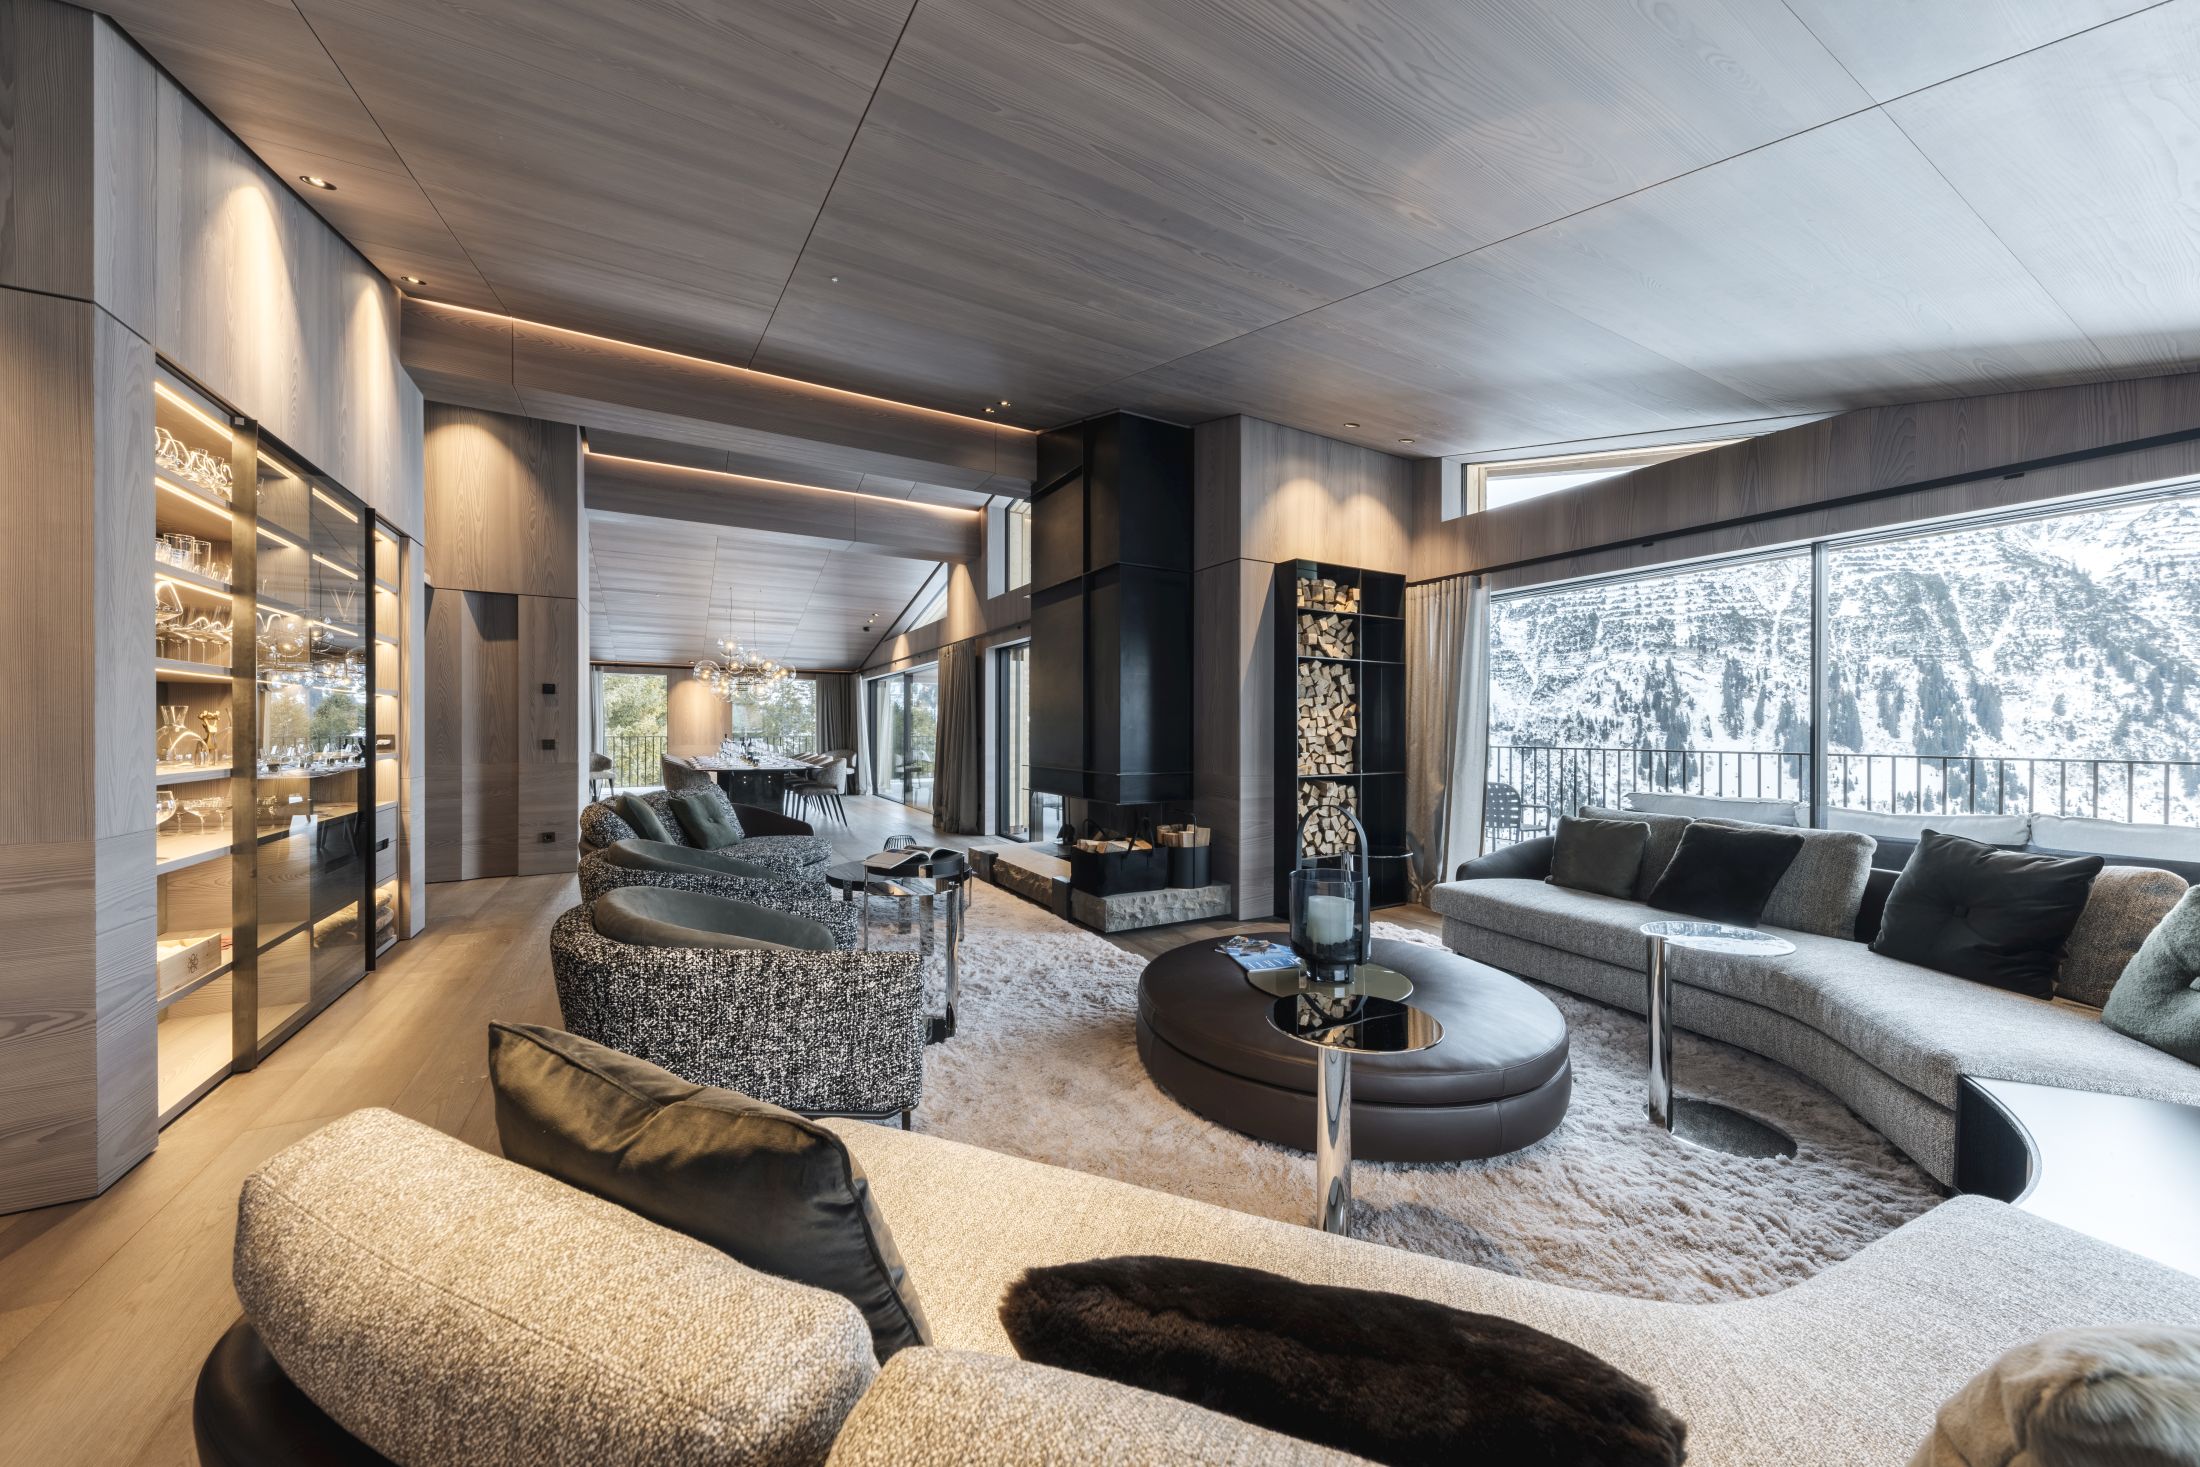 Stylish living area of Le Chalet, one of teh top luxury chalets in Oberlech.